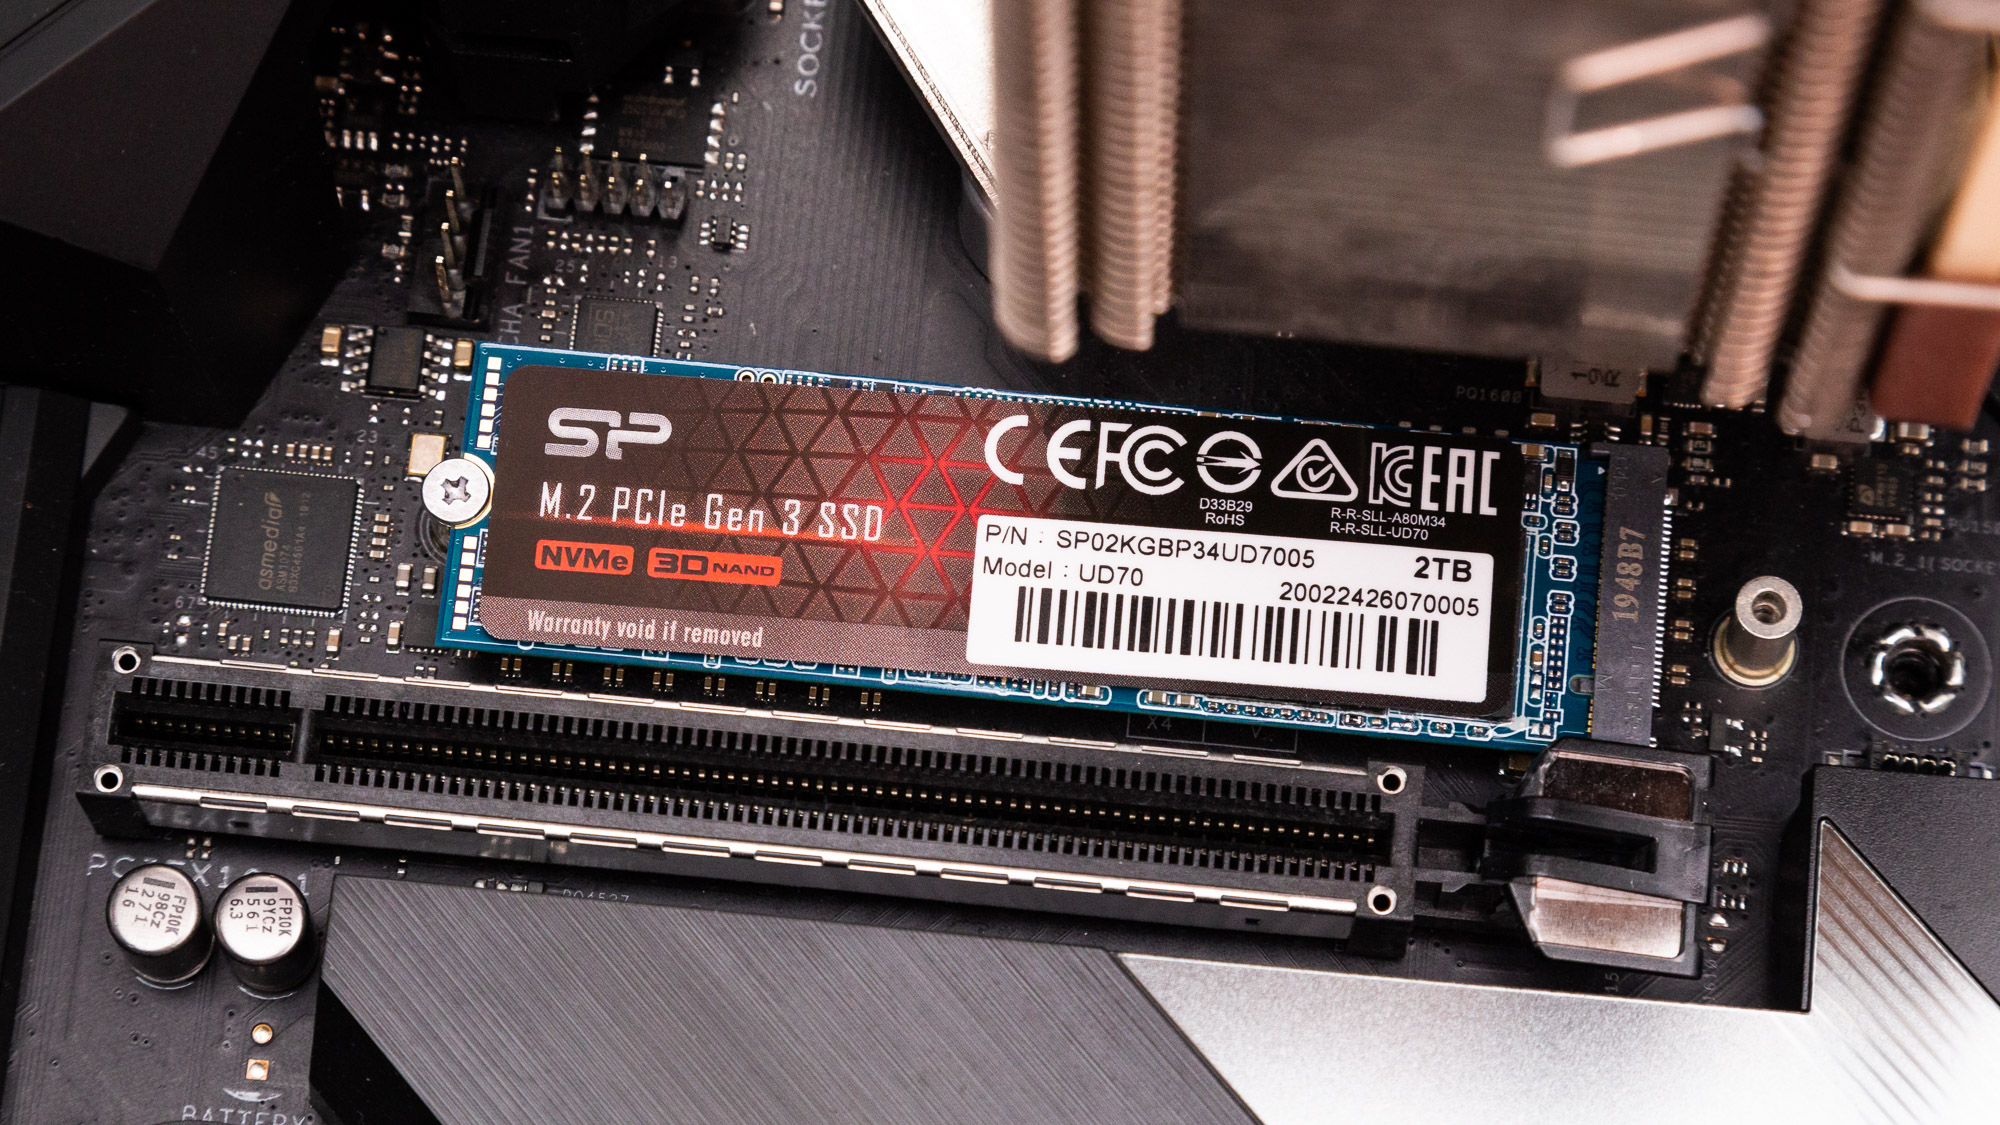 Silicon Power US70 SSD review: Terrific price-to-performance